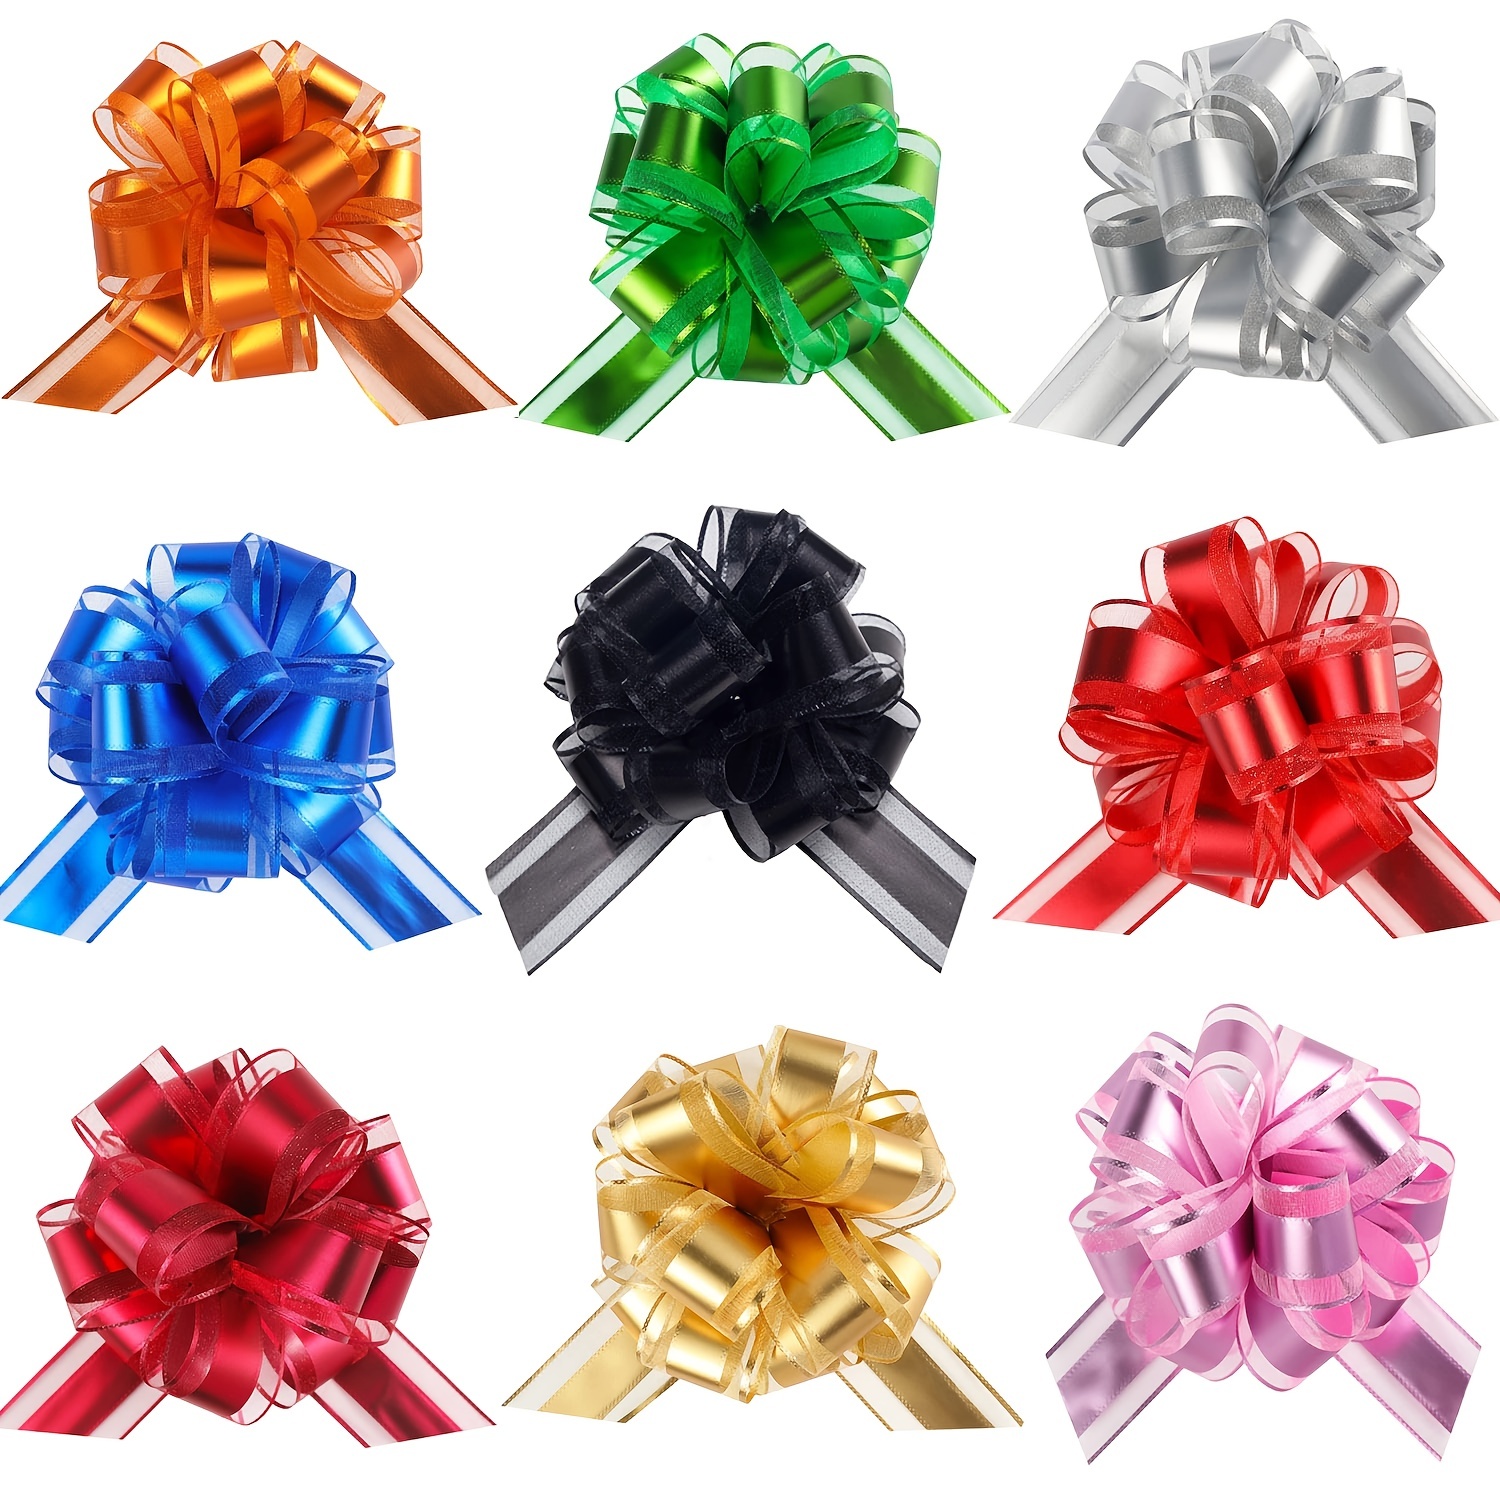 10PCS Large Pull Bows,Black Bows for Gift Wrapping,Organza Gift Wrapping  Ribbon Pull Bows Gift Bows for Wedding Gift Baskets,Christmas Party  Birthday